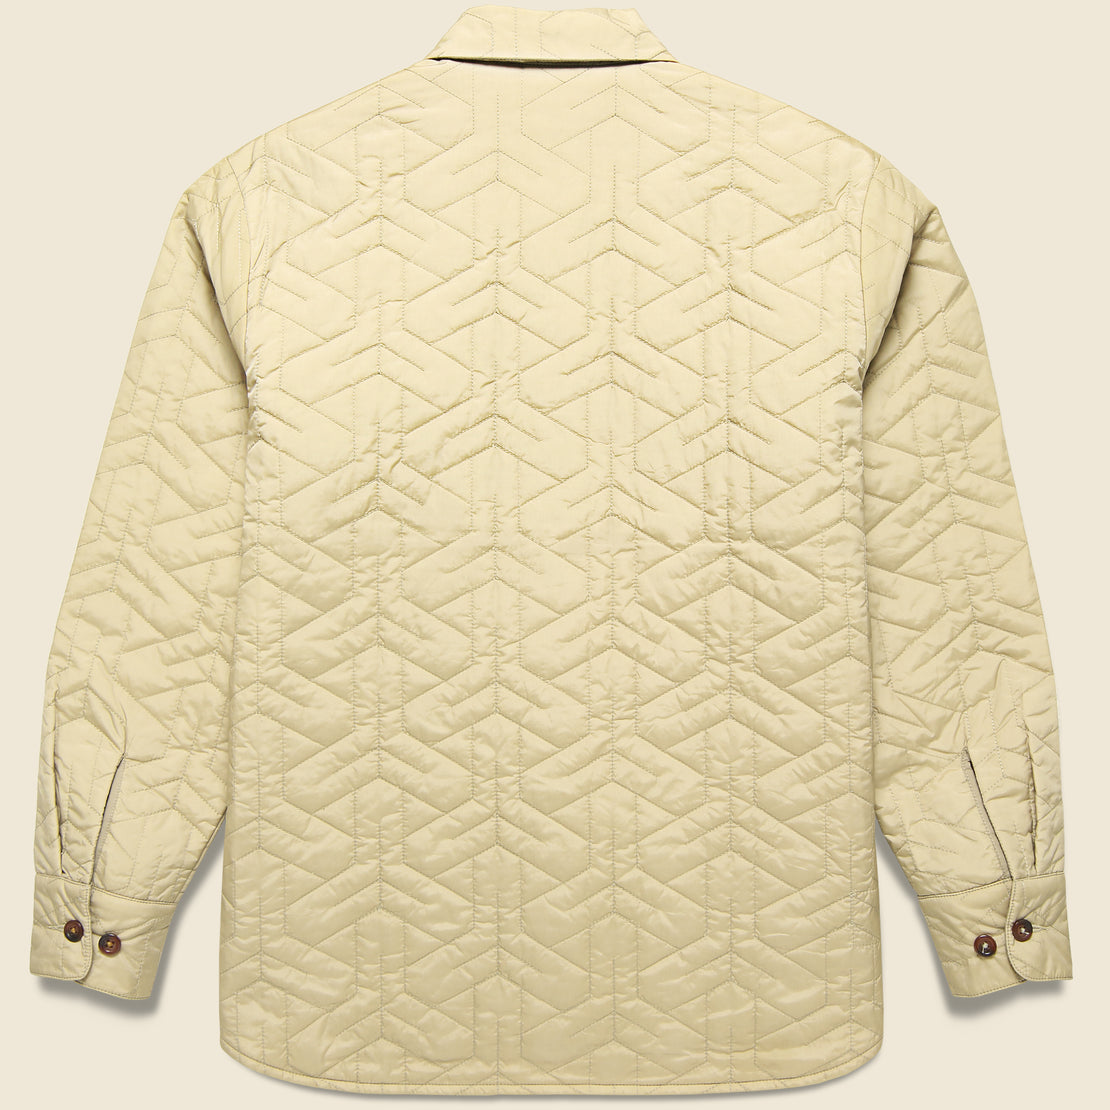 Quilted Travail Jacket - Pale Khaki - Universal Works - STAG Provisions - Outerwear - Coat / Jacket